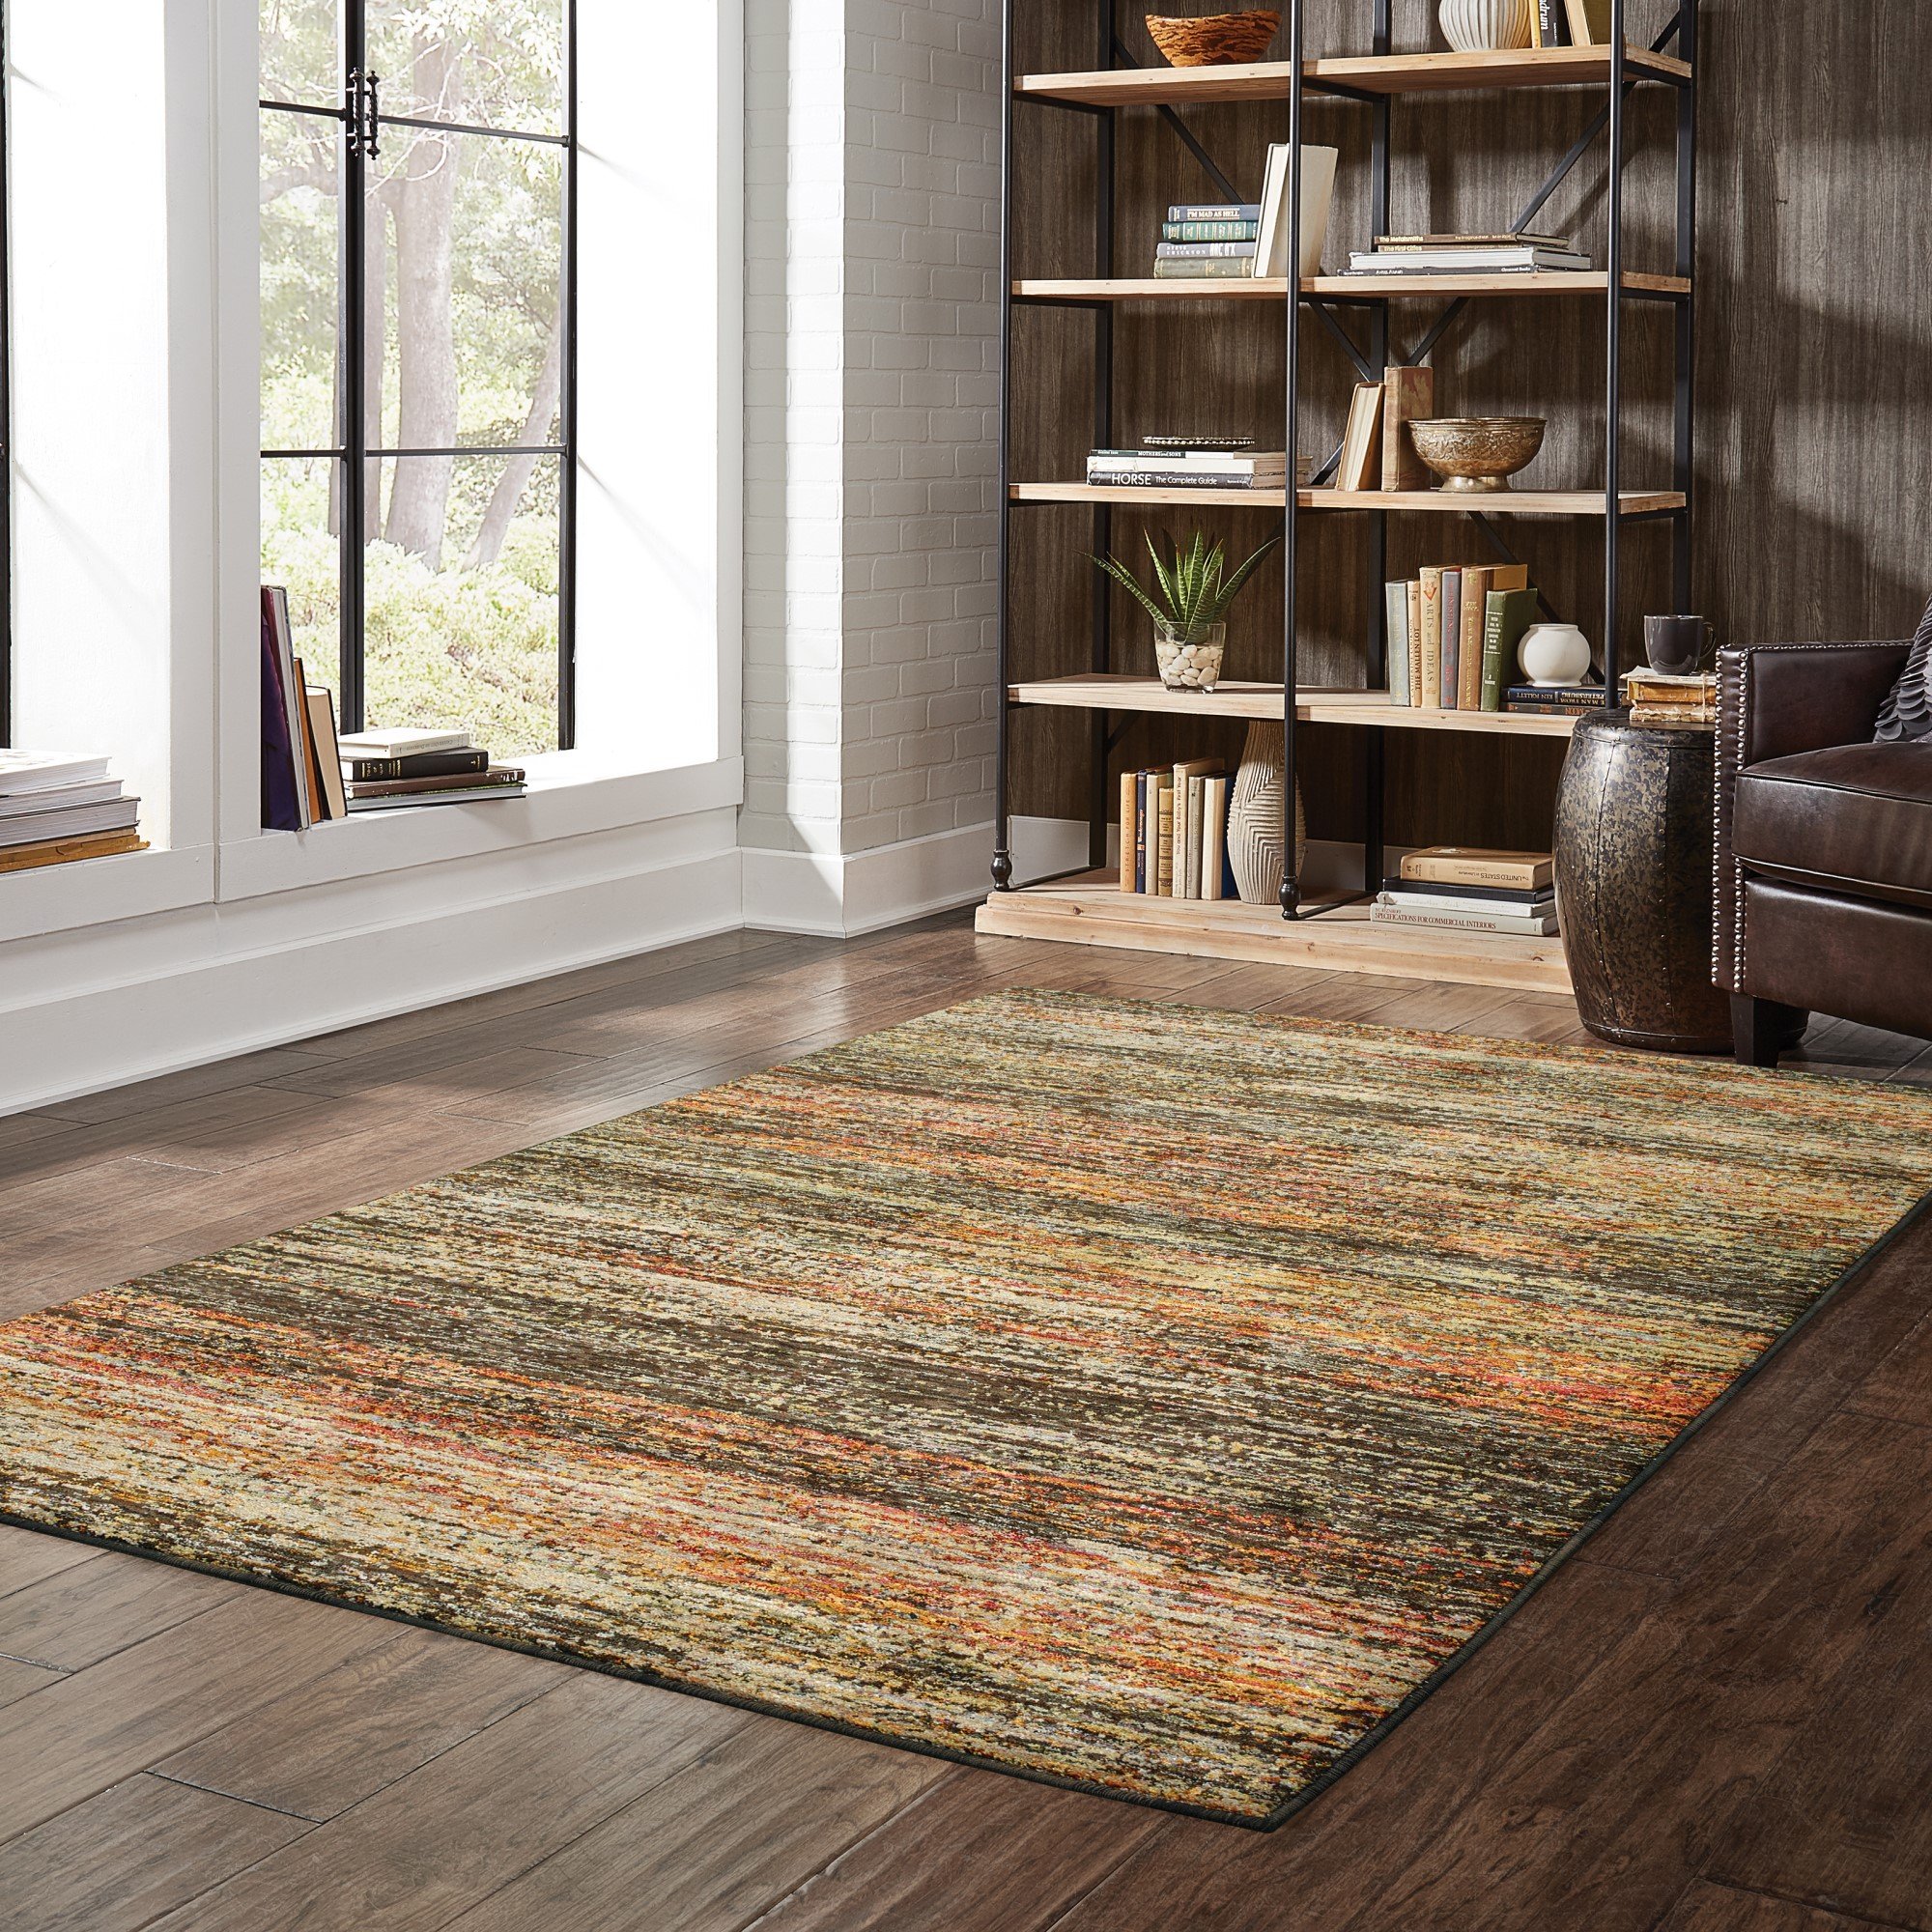 Oriental Weavers Atlas 8037 Rugs, Replace Window With Bookcase Jquery